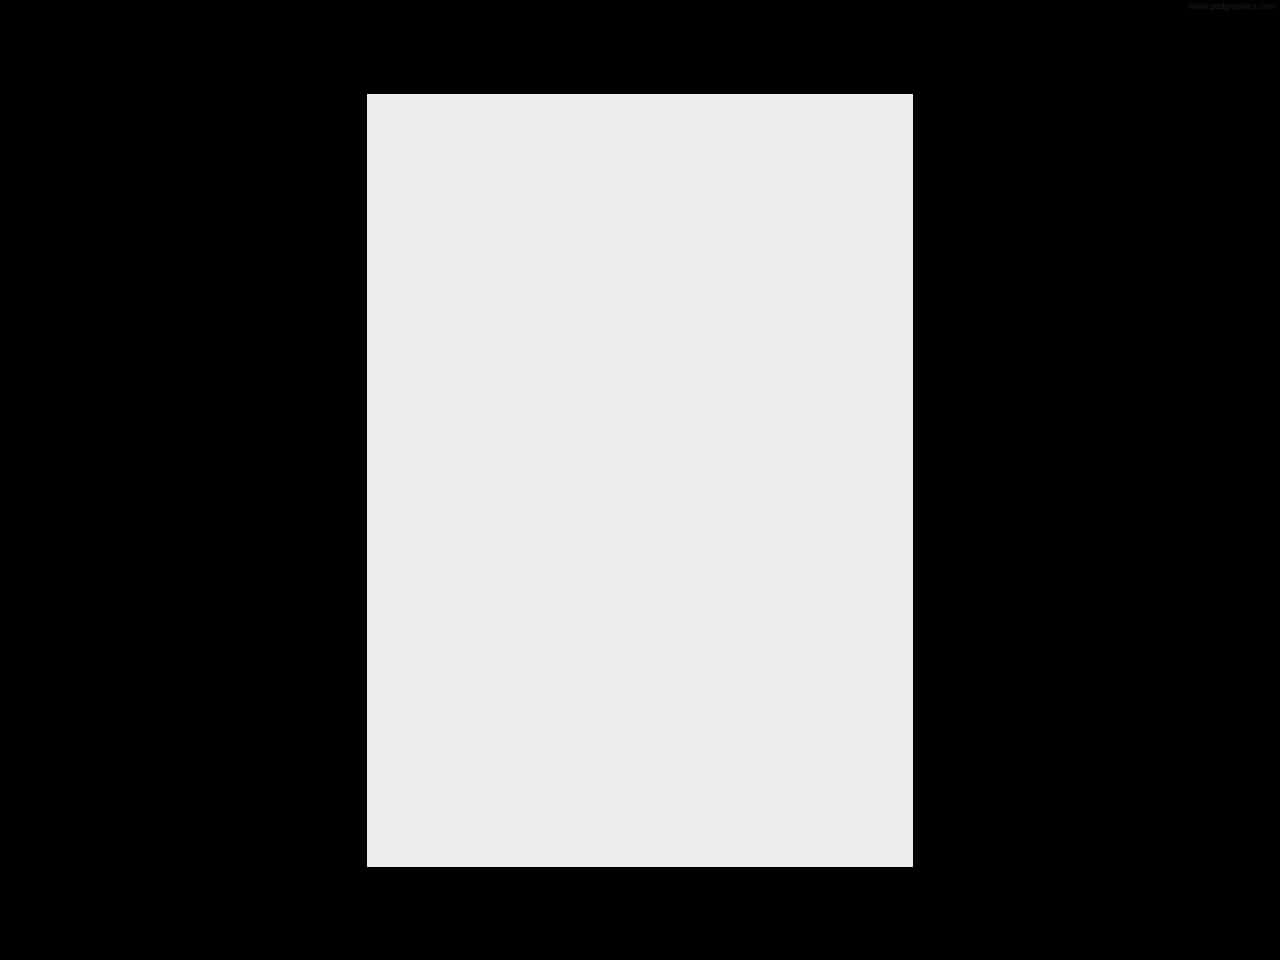 A White Square On A Black Background